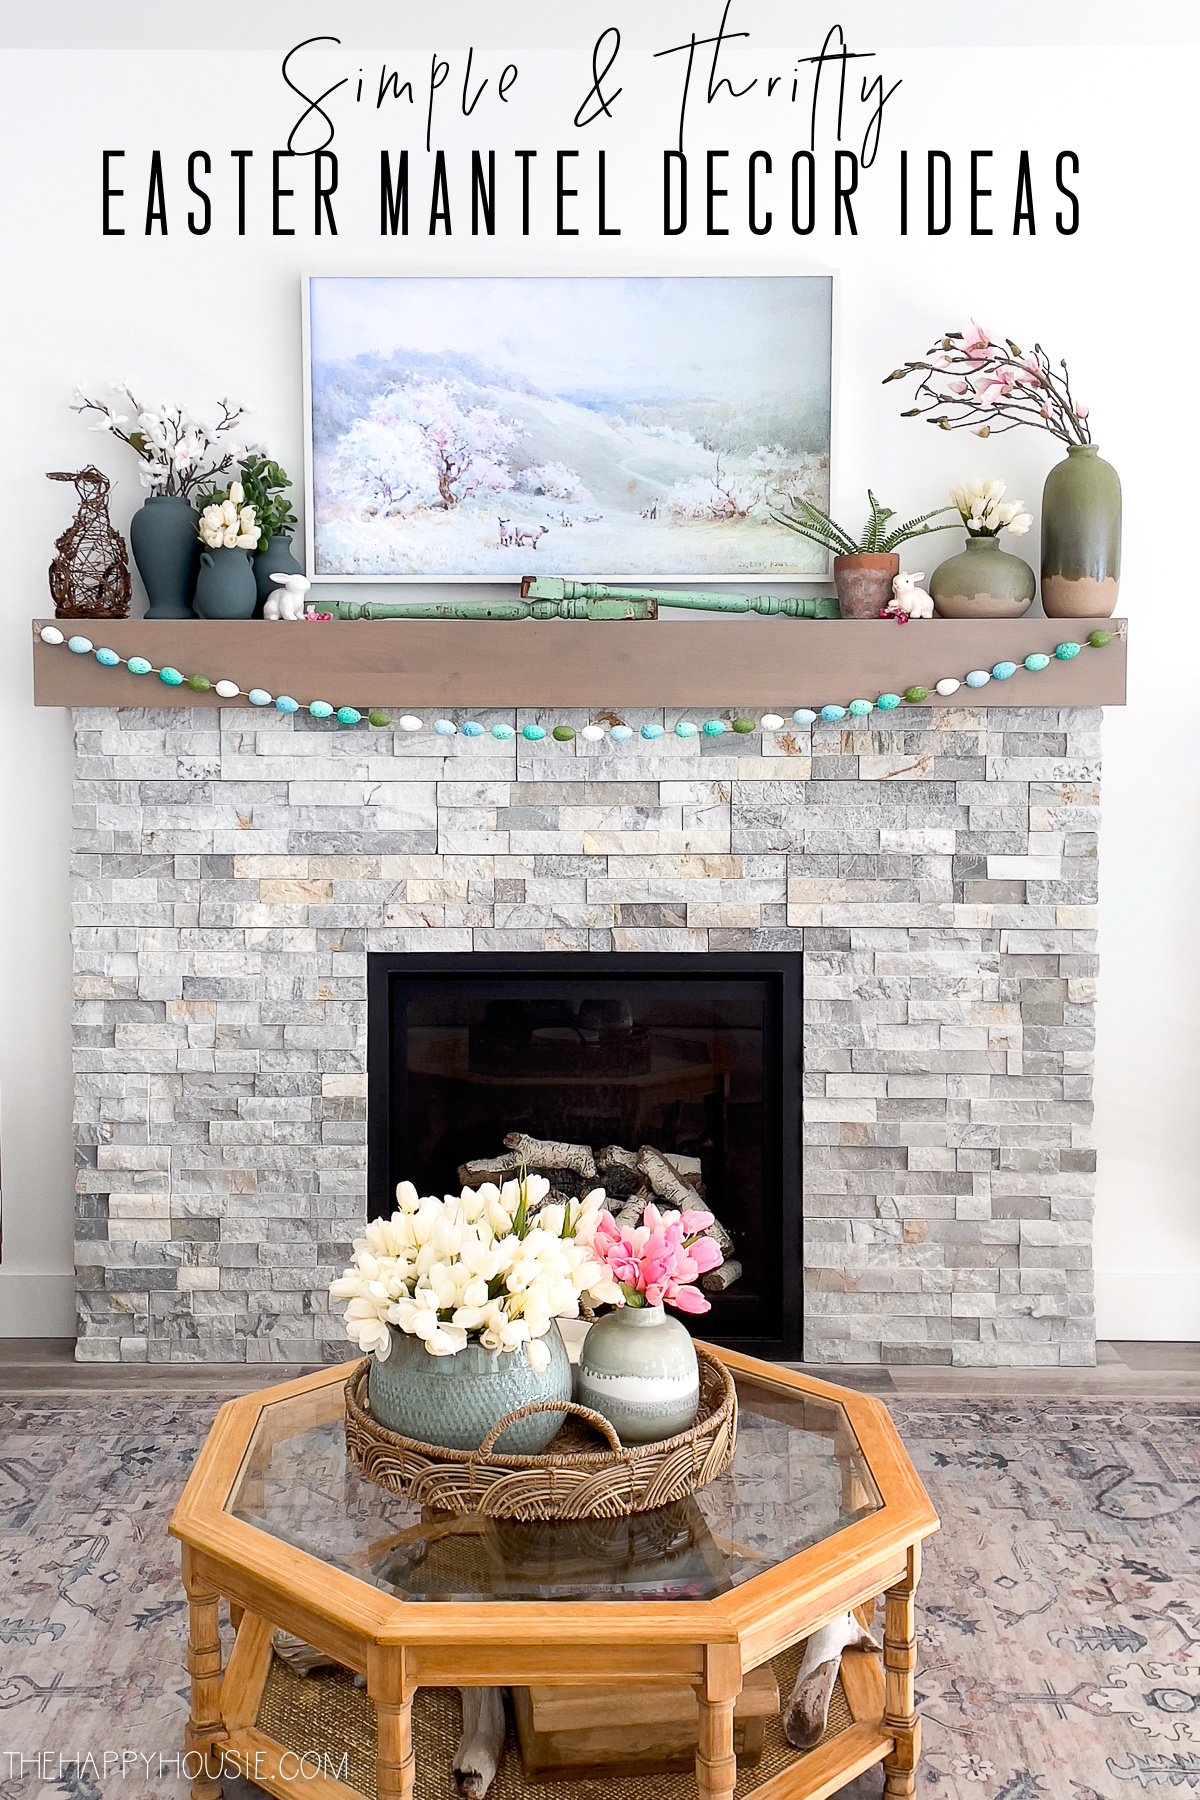 labeled image of easter mantel decor on a stone fireplace